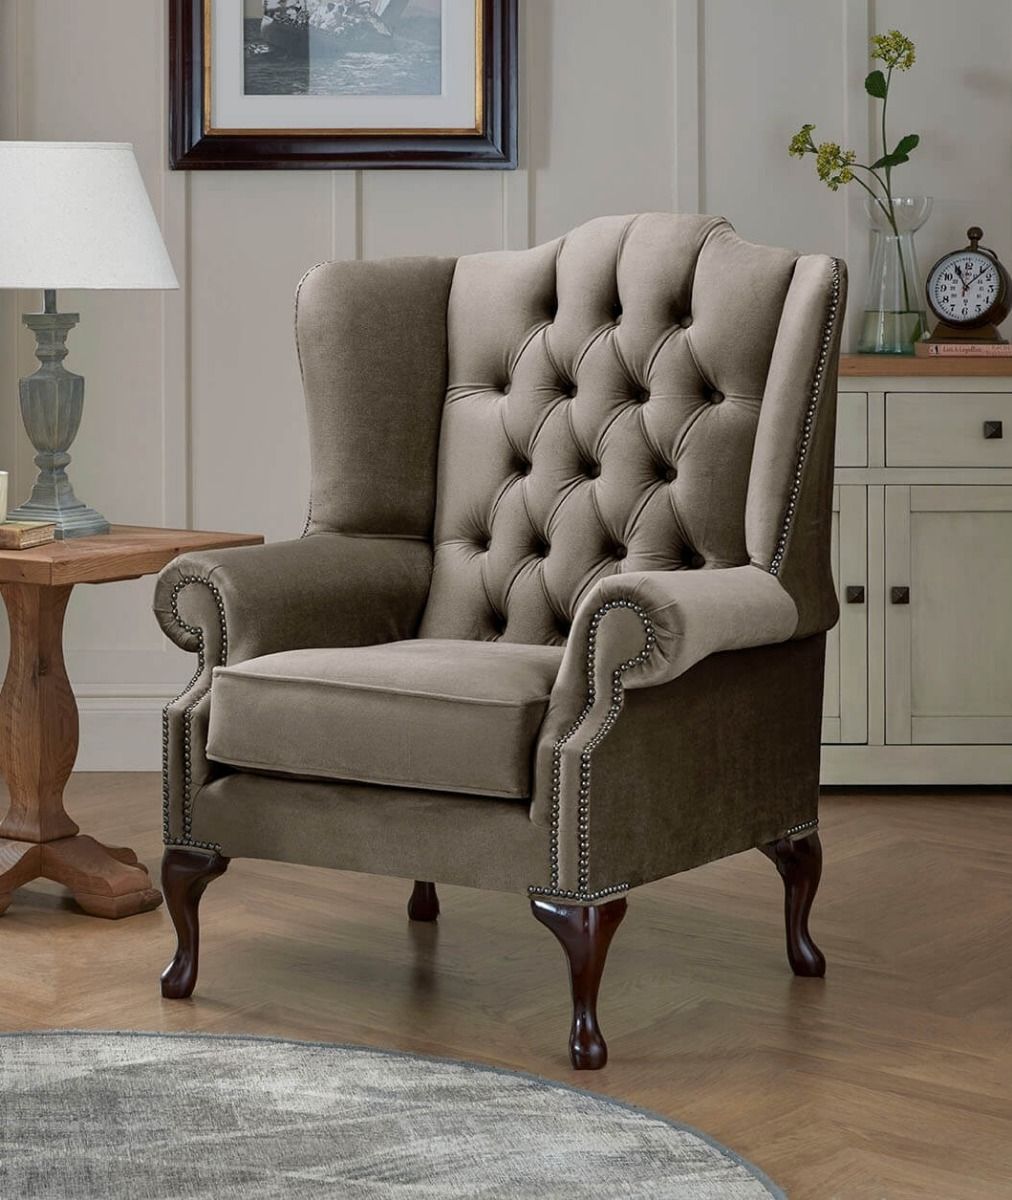 Chesterfield Carlton Flat Wing Armchairs Malta Taupe 08 | Chesterfield Sofas